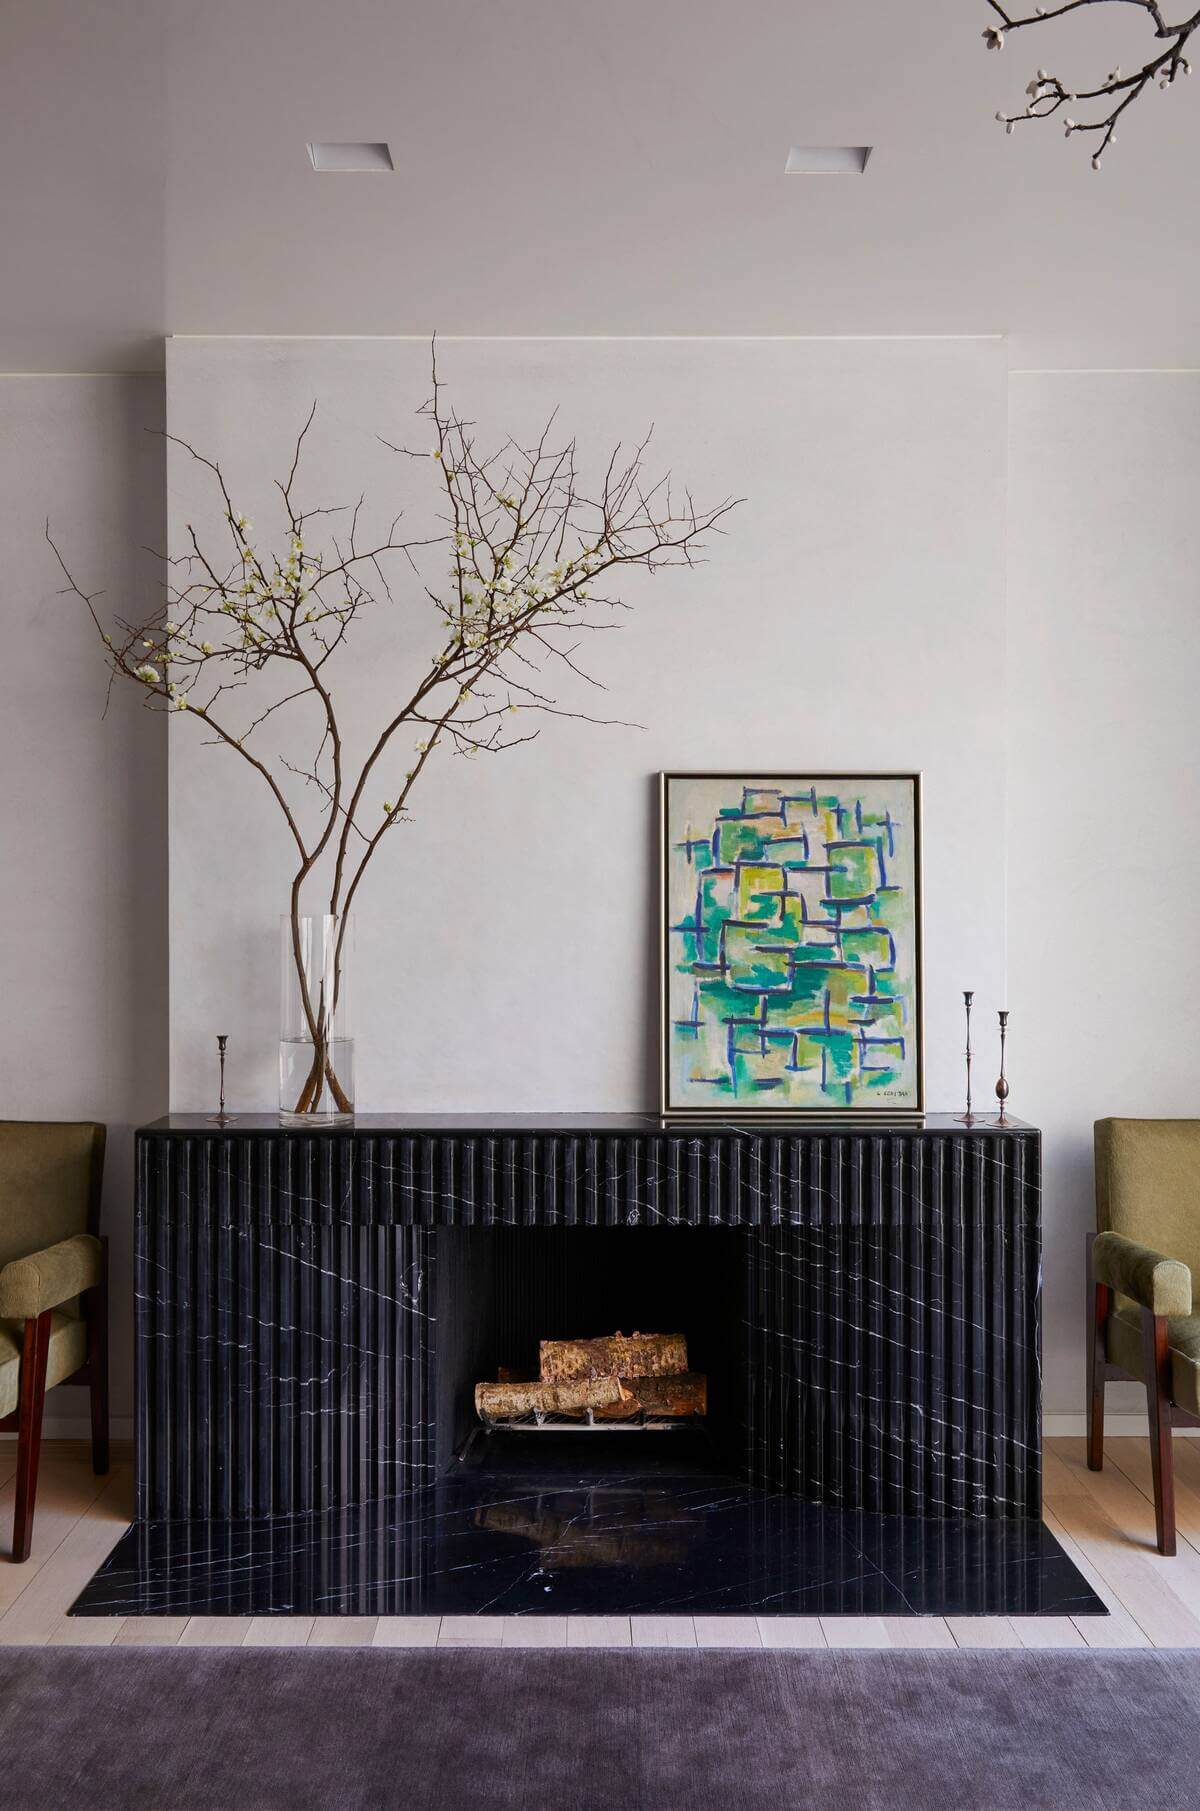 West Village Townhouse renovated by Steven Harris Architects. Interior Design by Amie Sachs.